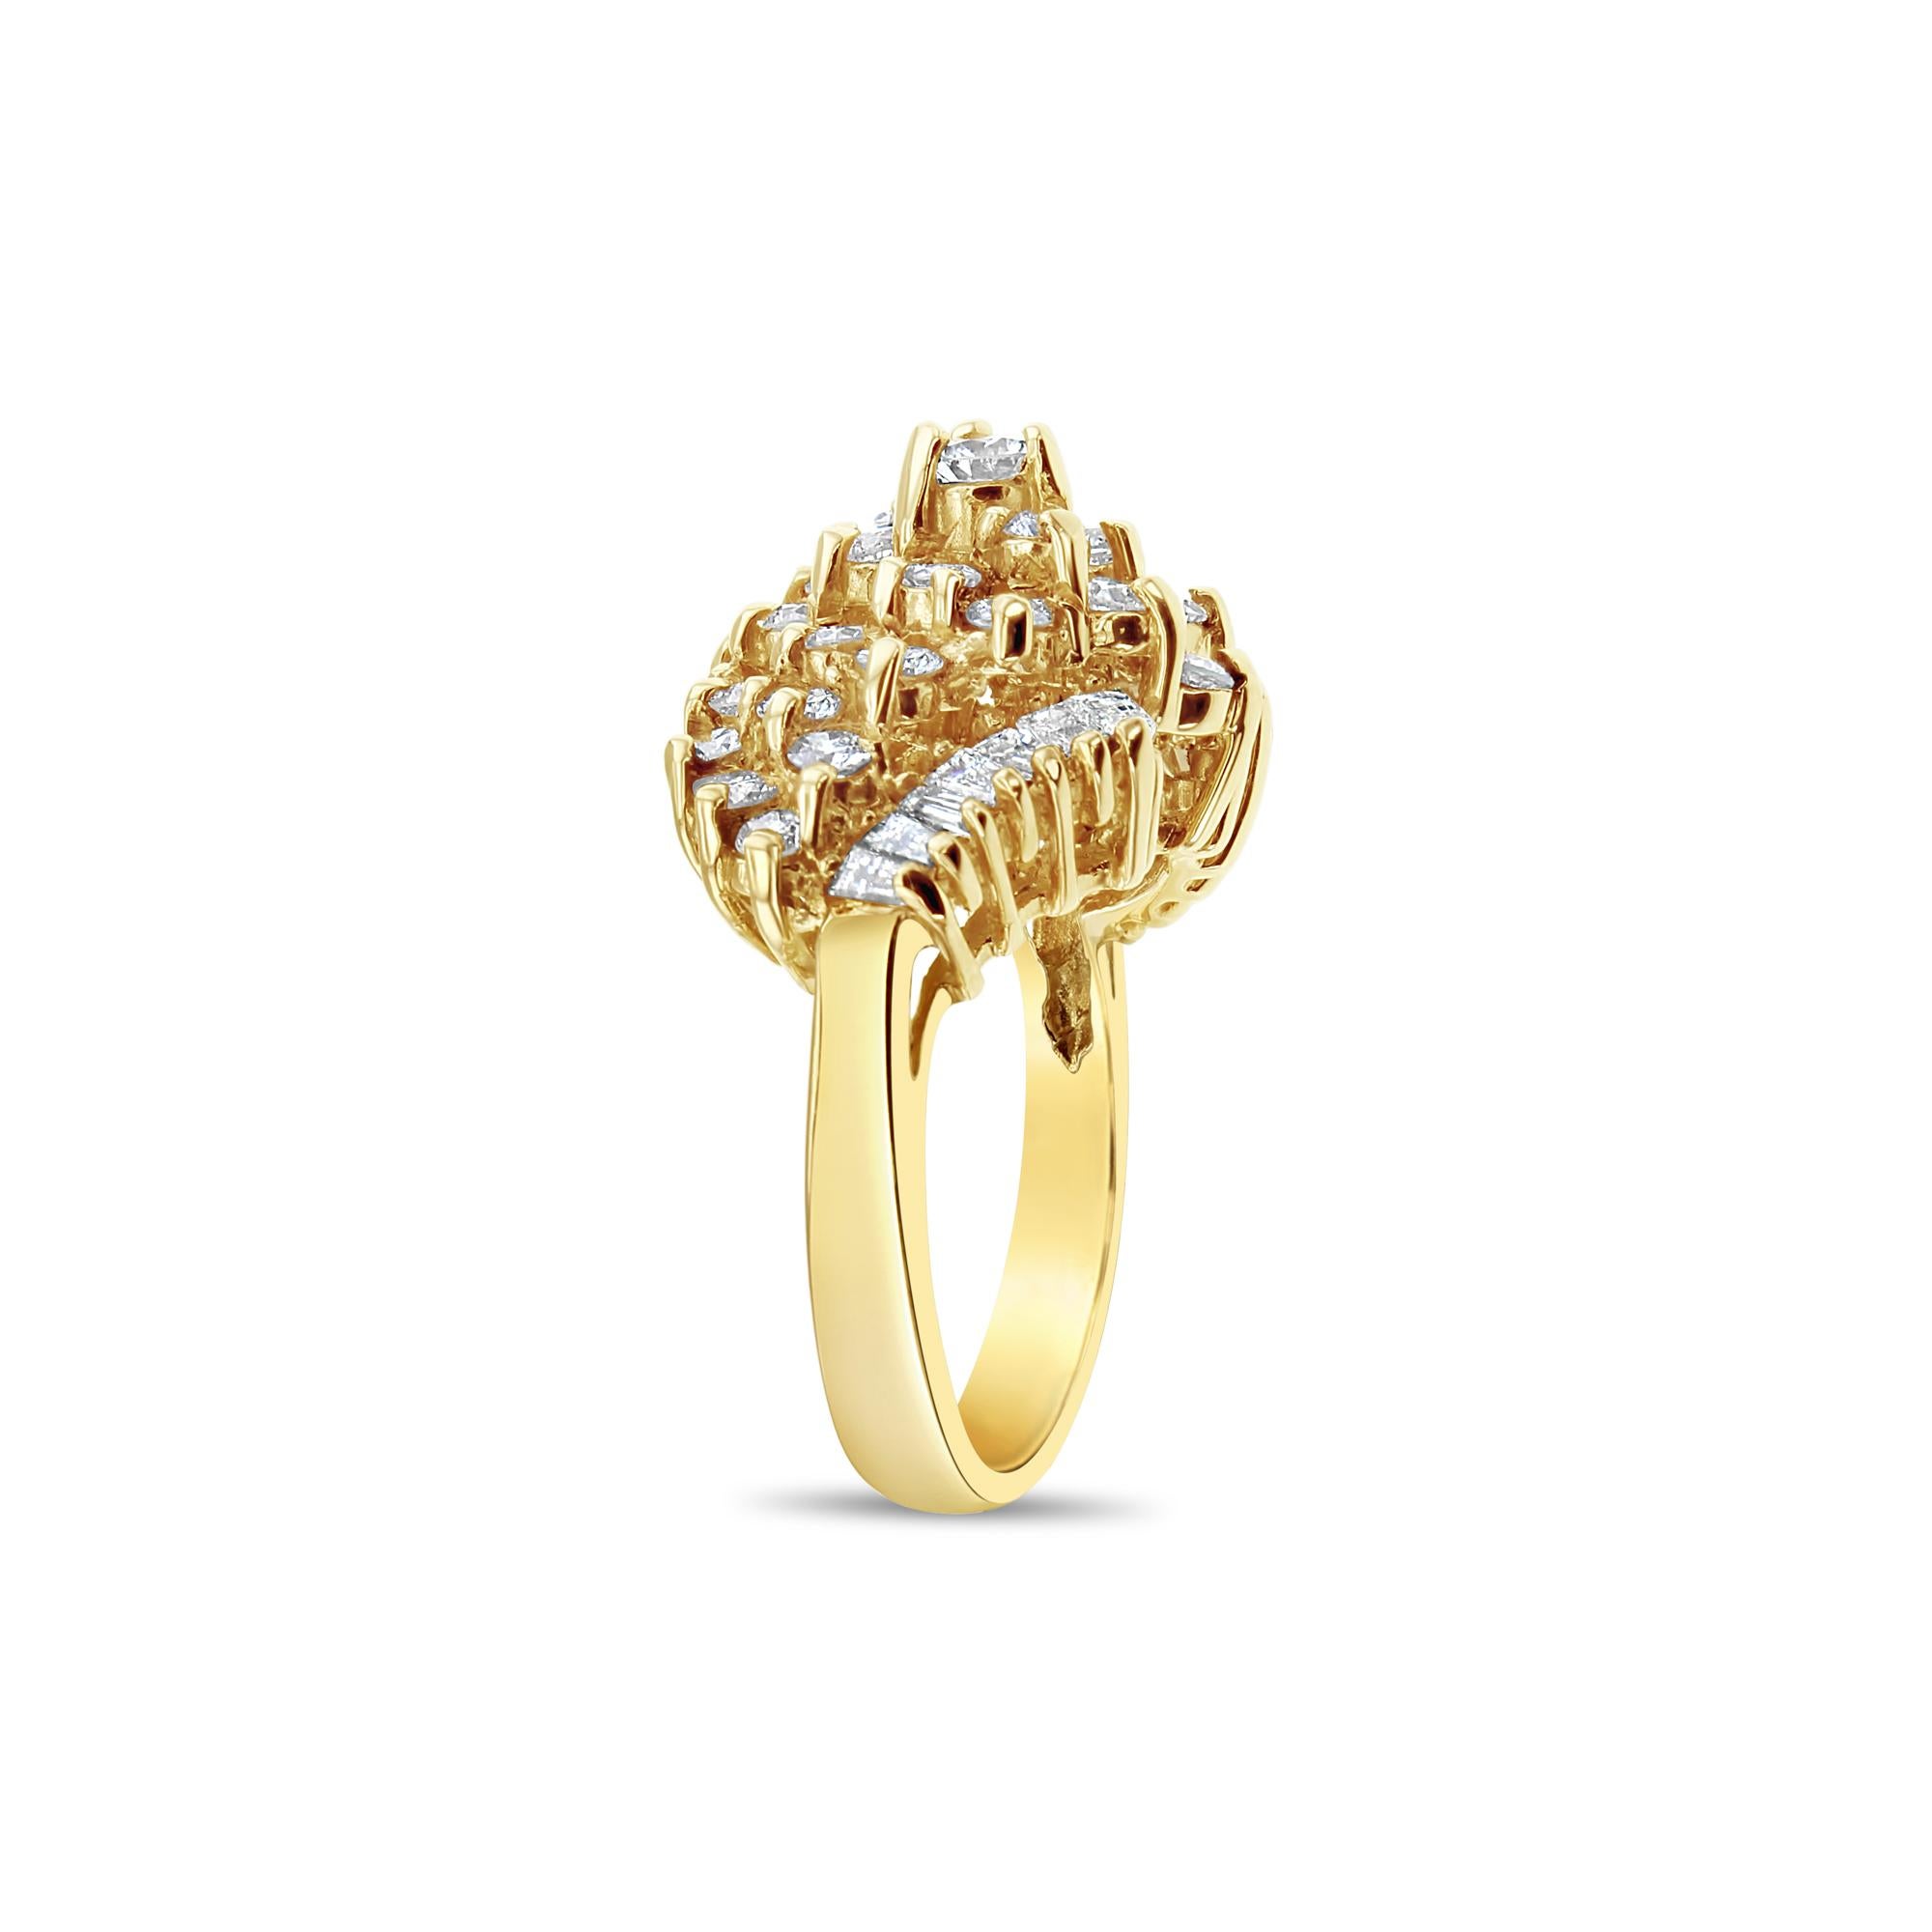 ♥ Product Summary ♥

Main Stone: Diamonds
Approx. Diamond Carat Weight: 2.50cttw
Diamond Color: G/H
Diamond Clarity: VS2/SI1
Diamond Cut: Round & Tapered Baguette 
Band Material: 14k Yellow Gold
Dimensions: 16mm x 21mm
Weight: 8 grams
